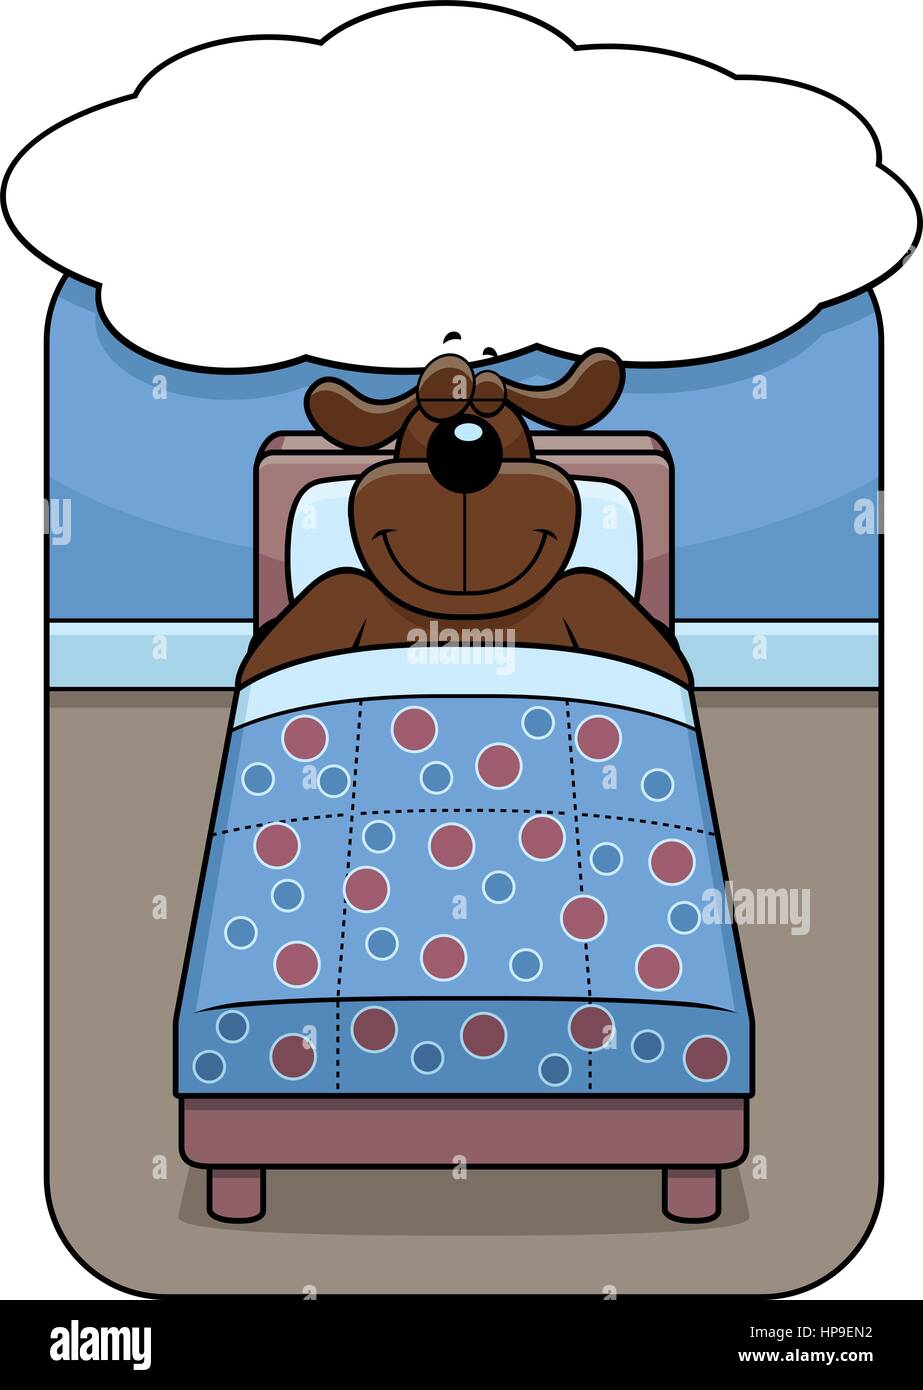 A cartoon dog in bed dreaming and smiling. Stock Vector